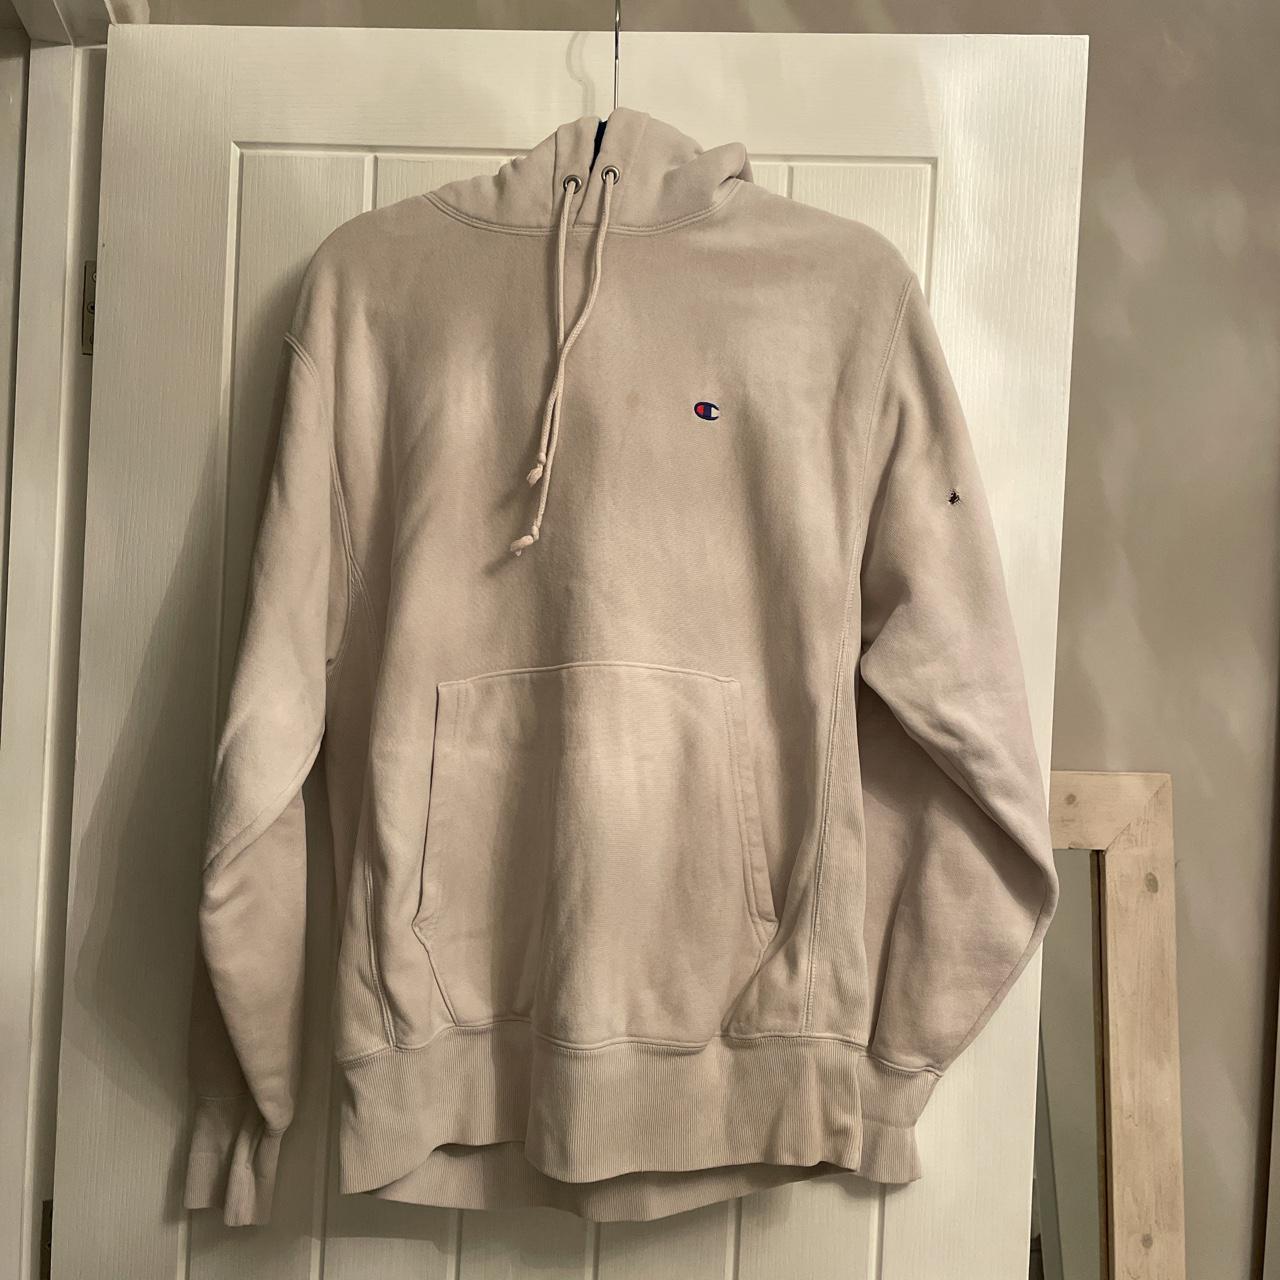 Product Image 1 - Vintage champion hoodie - meant